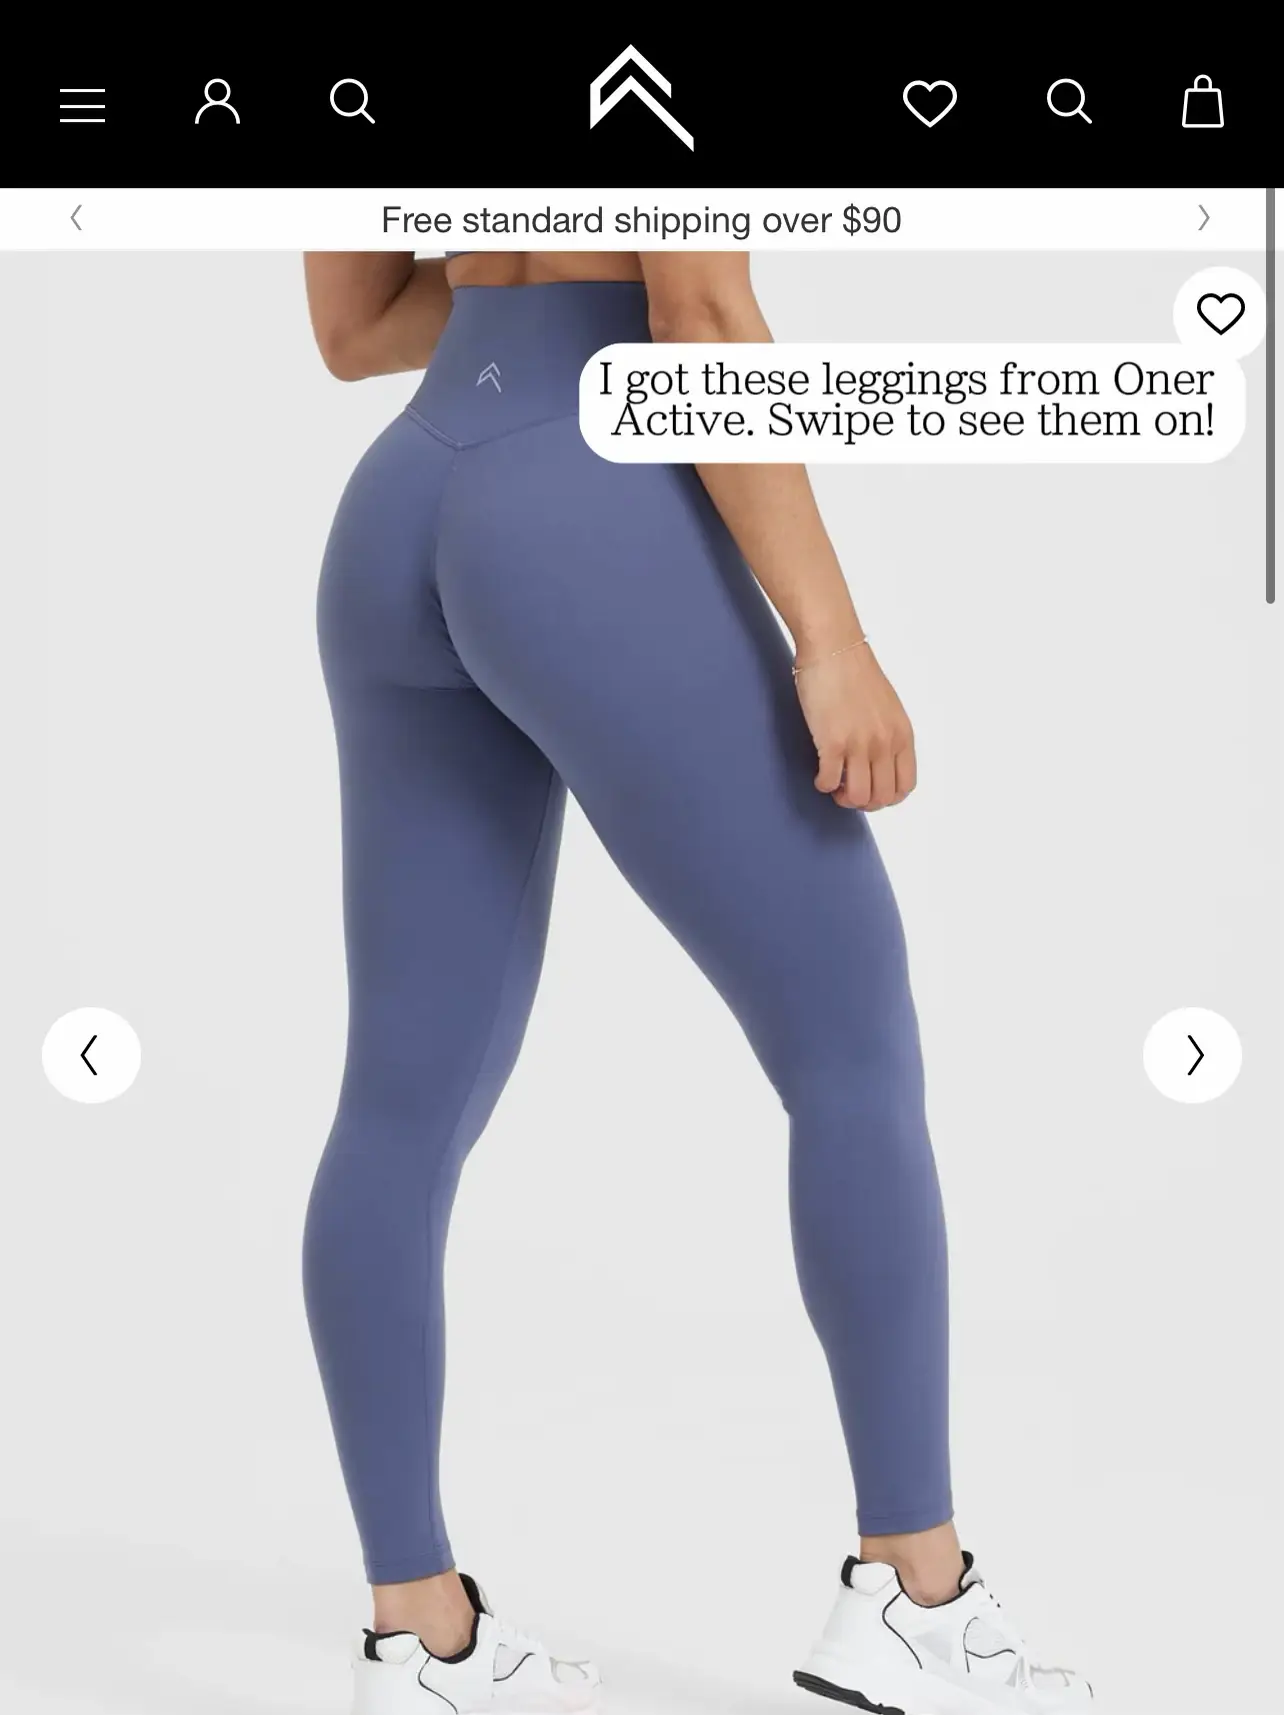 Are Oner Active Leggings worth the hype??